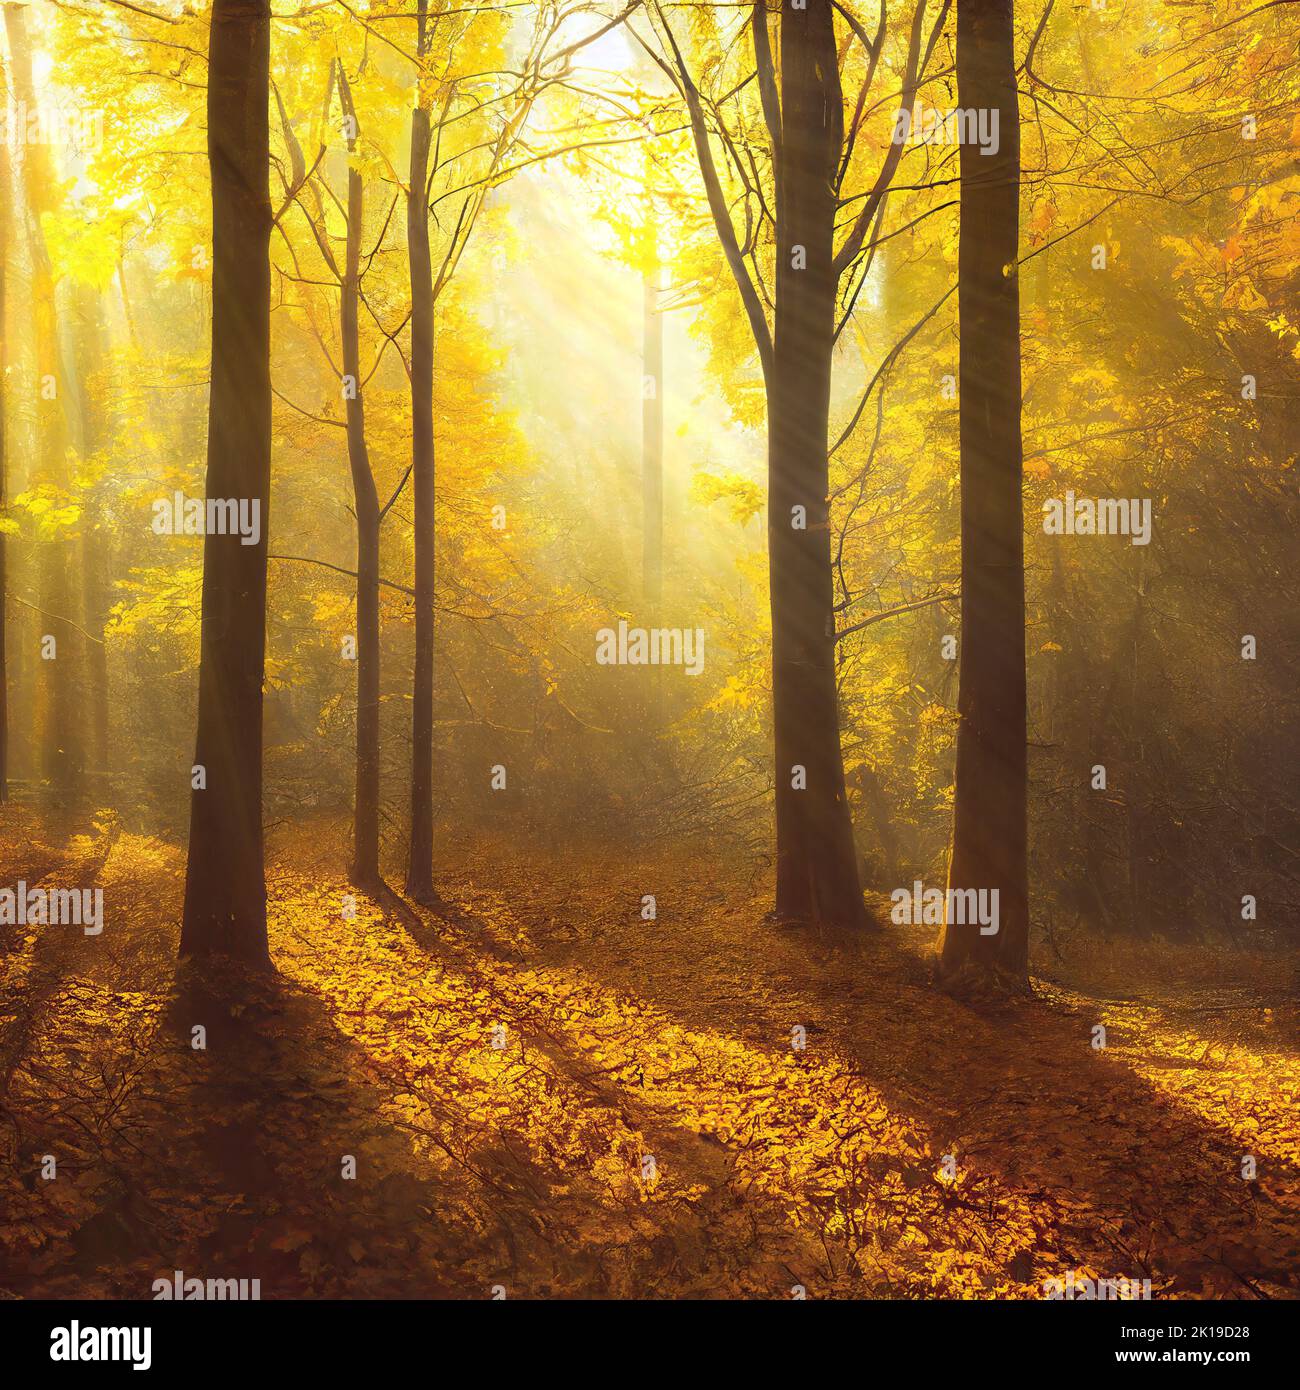 Sunny day in autumn park, sun beams shining through tree branches, square format. Digital illustration based on render by neural network Stock Photo